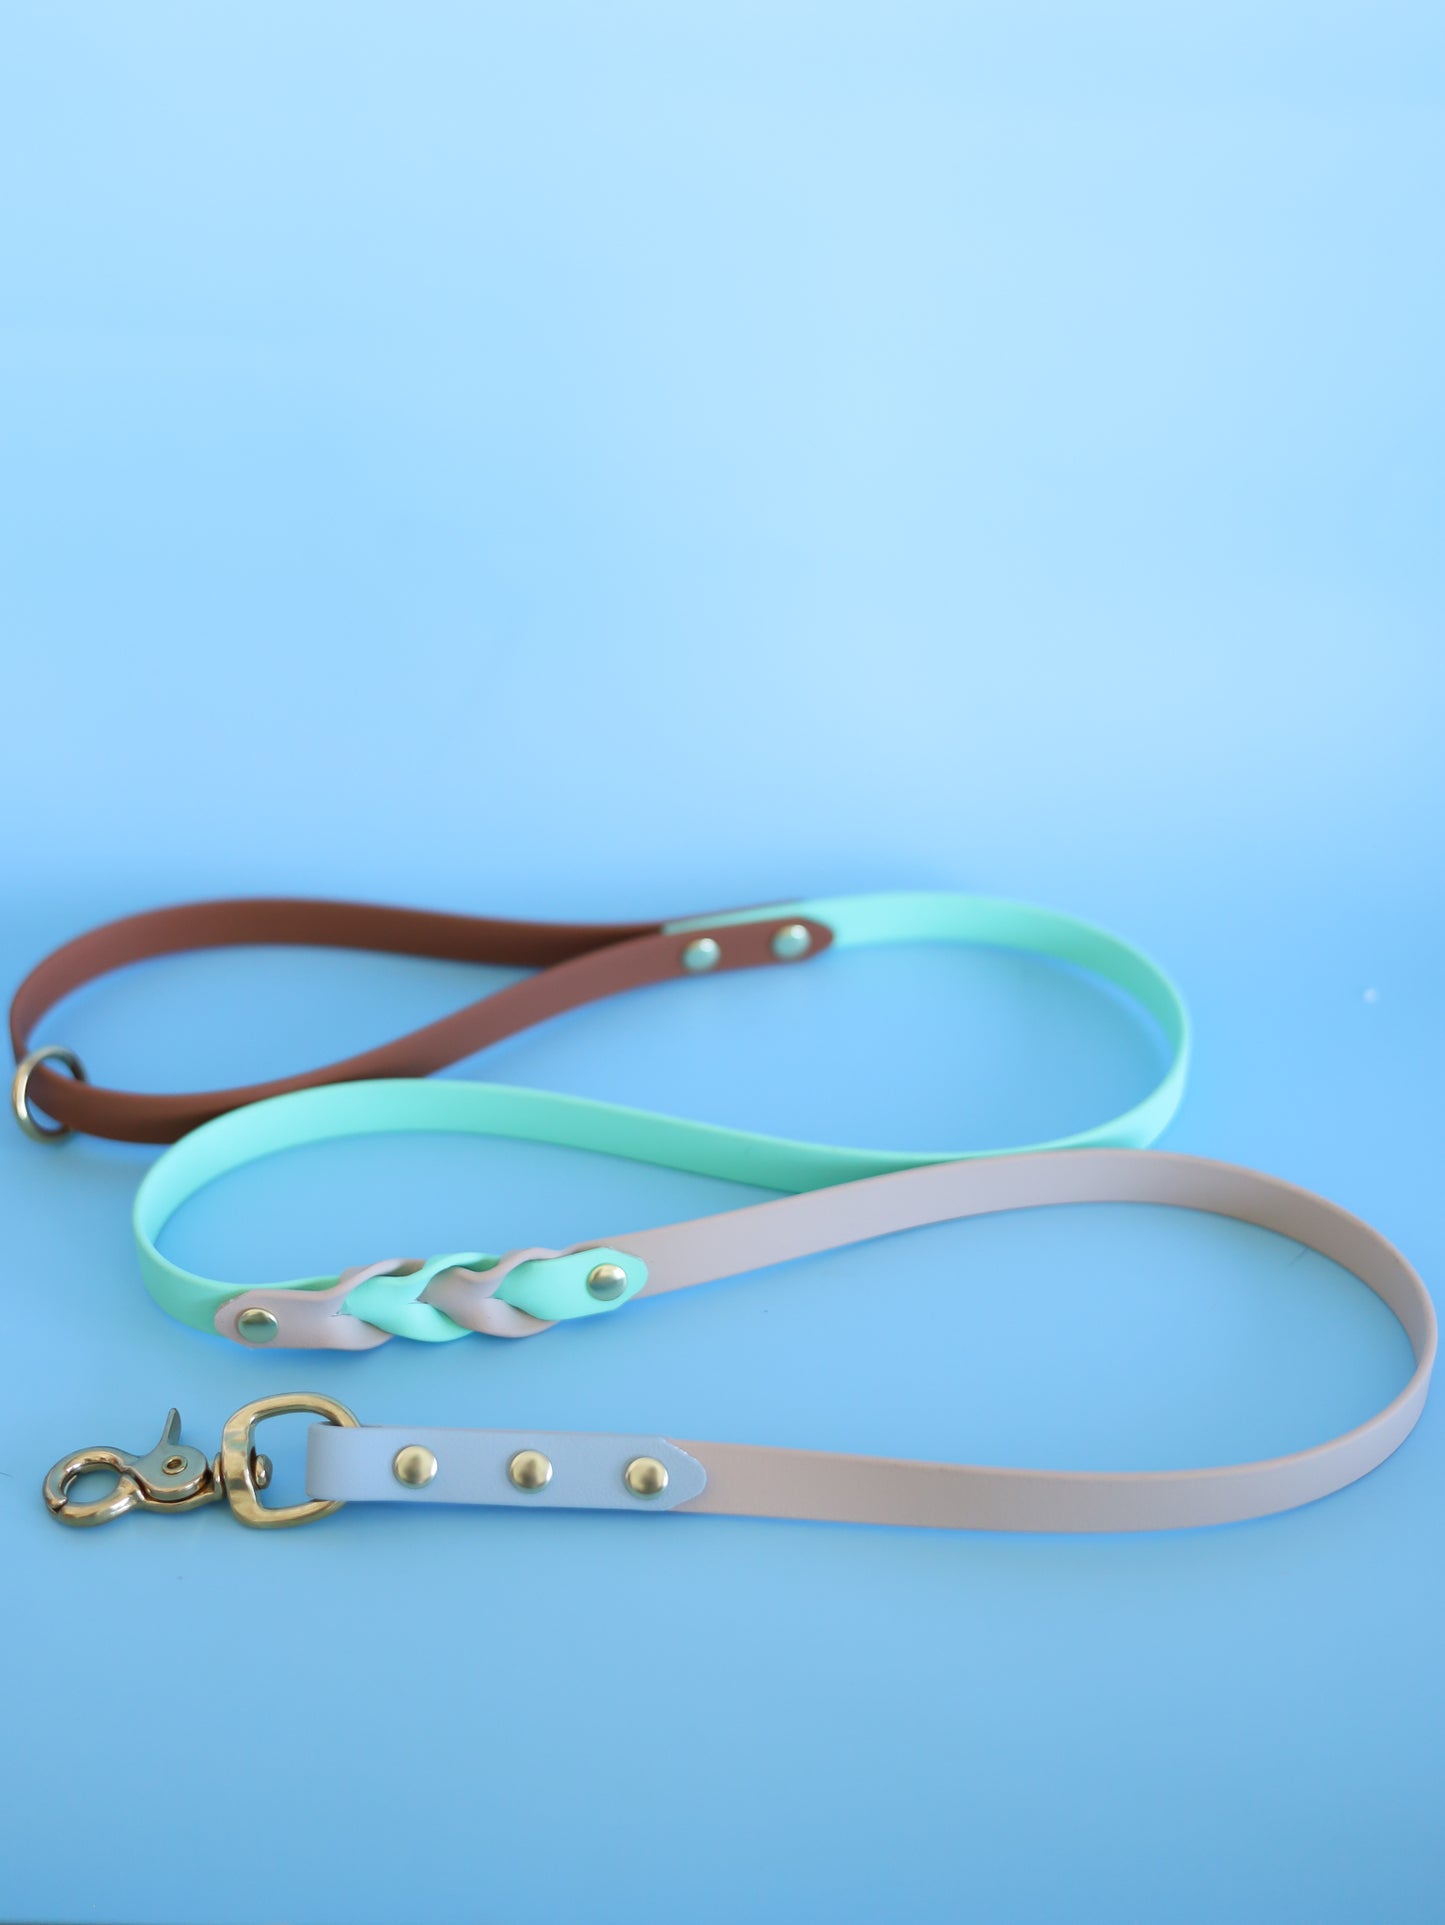 Breeze BioThane leash with braided detailing